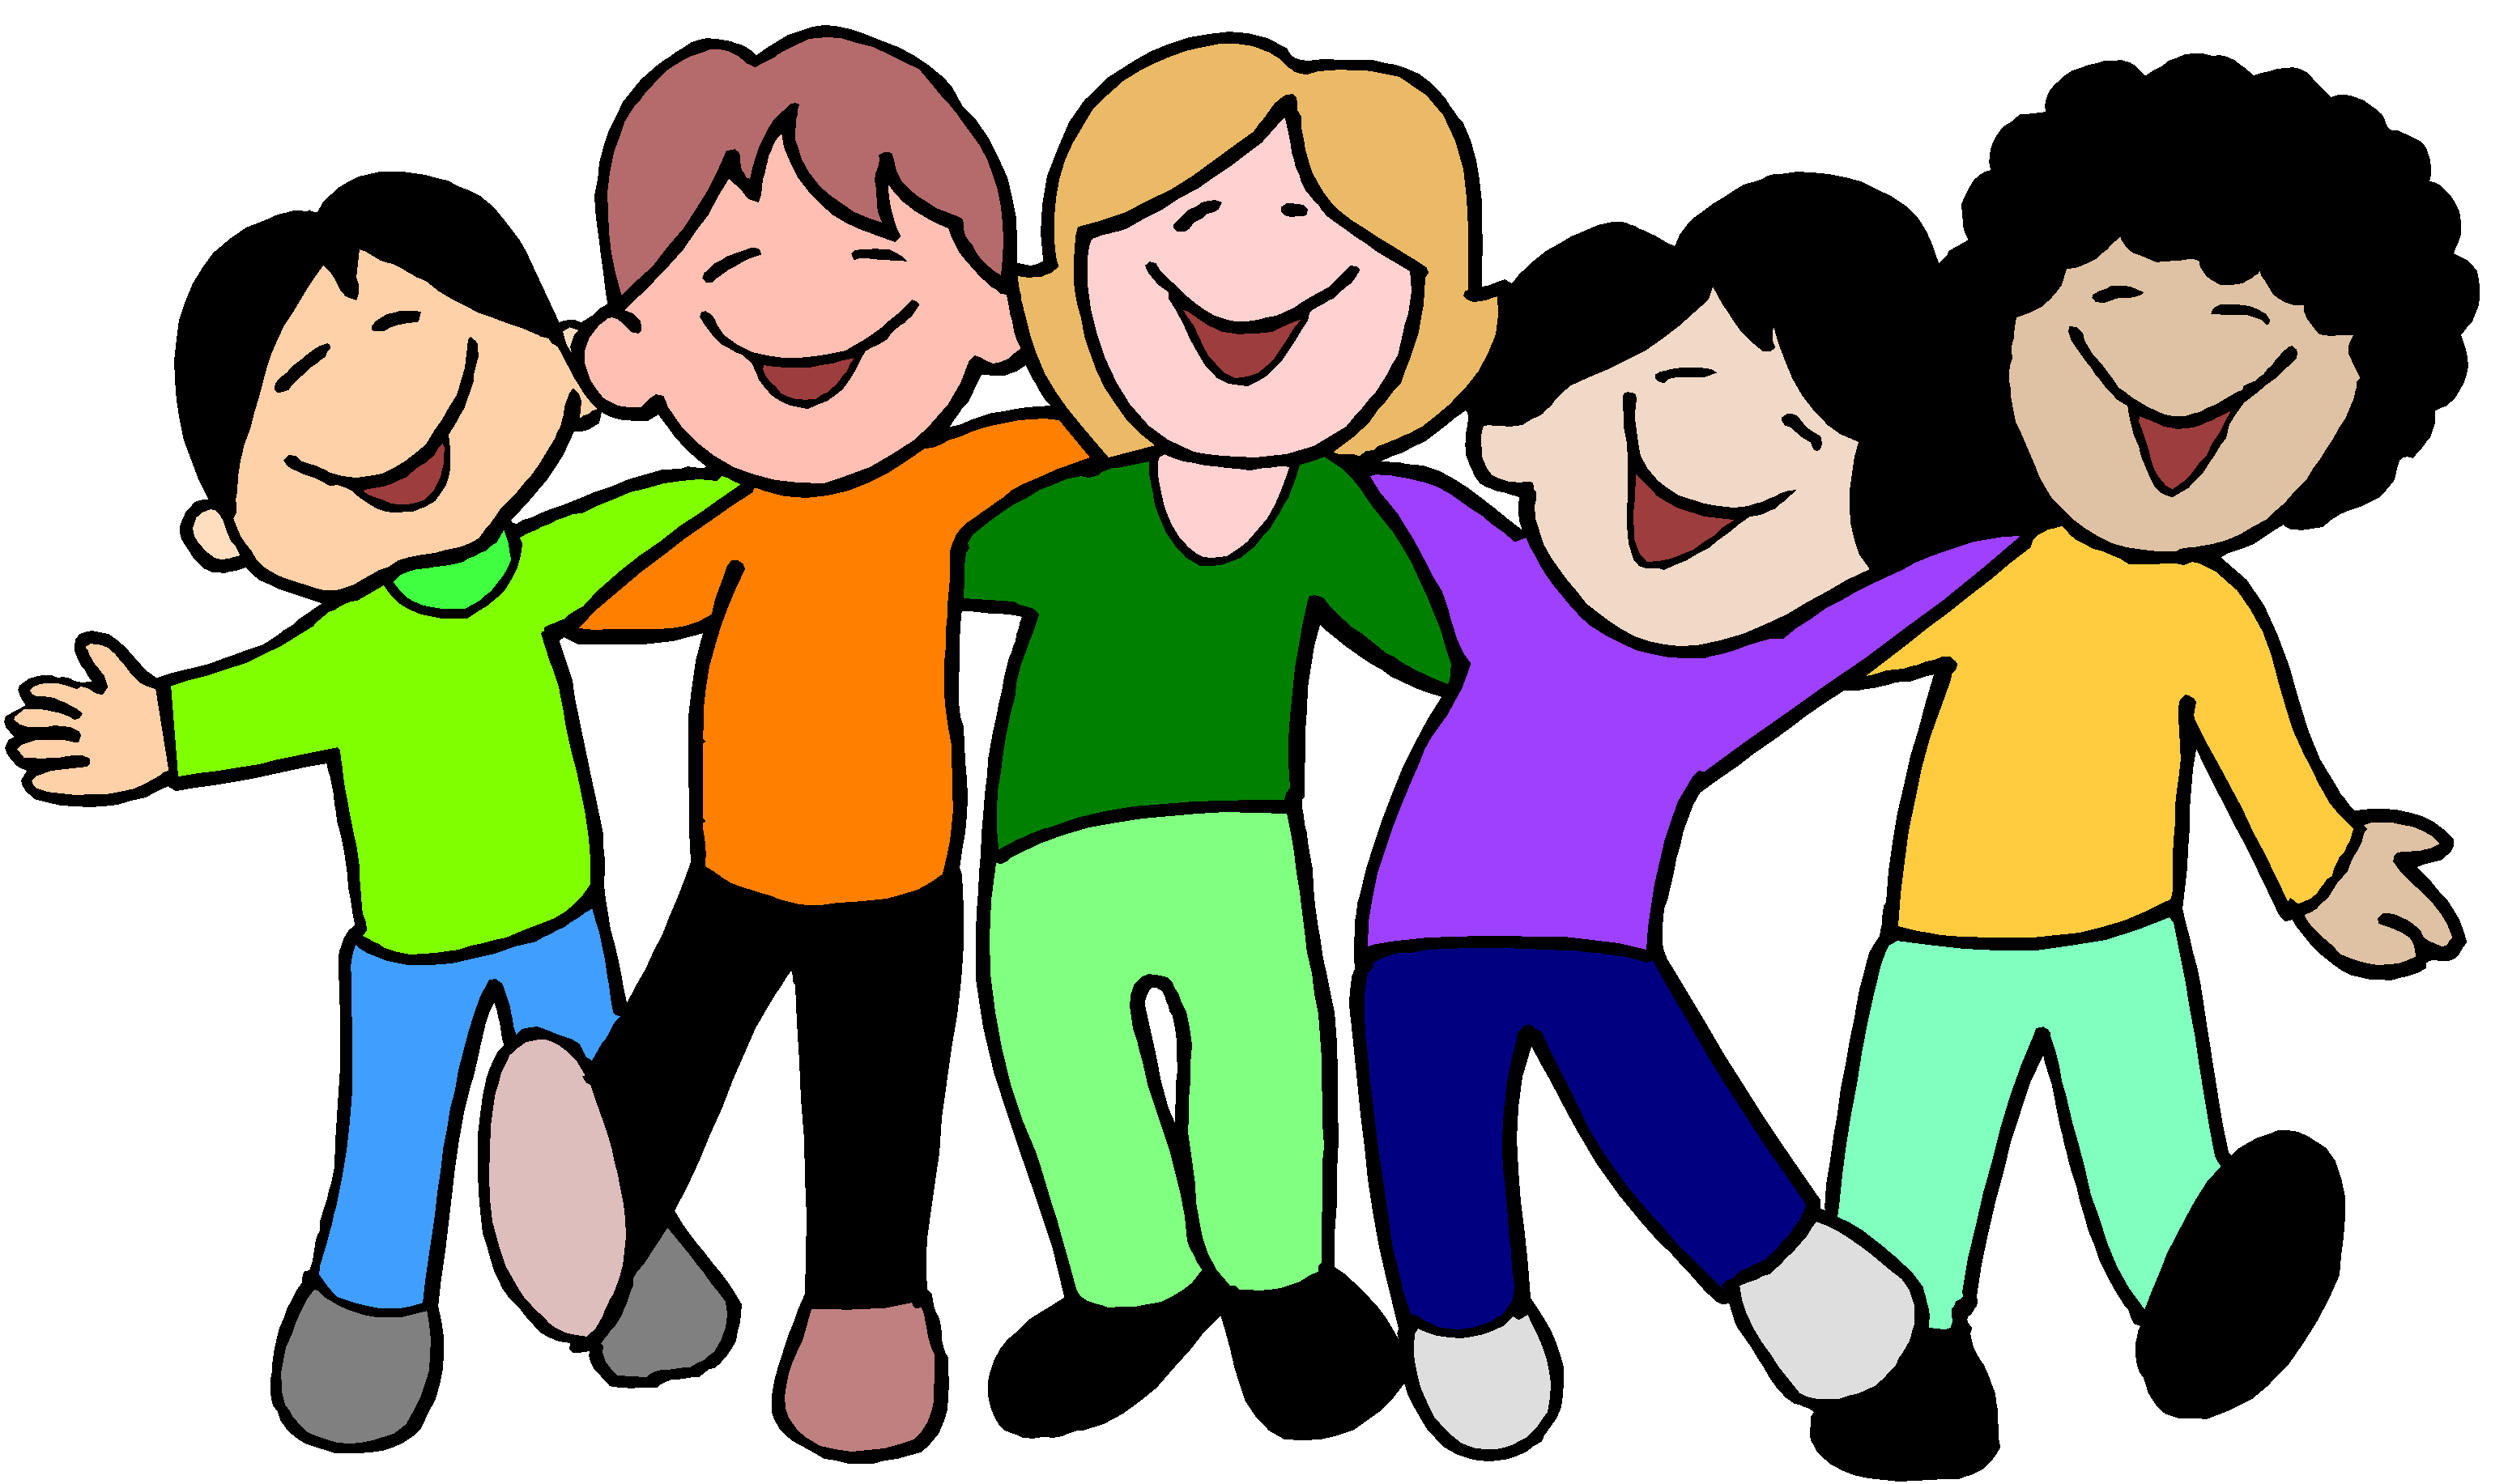 Kids playing together clipart